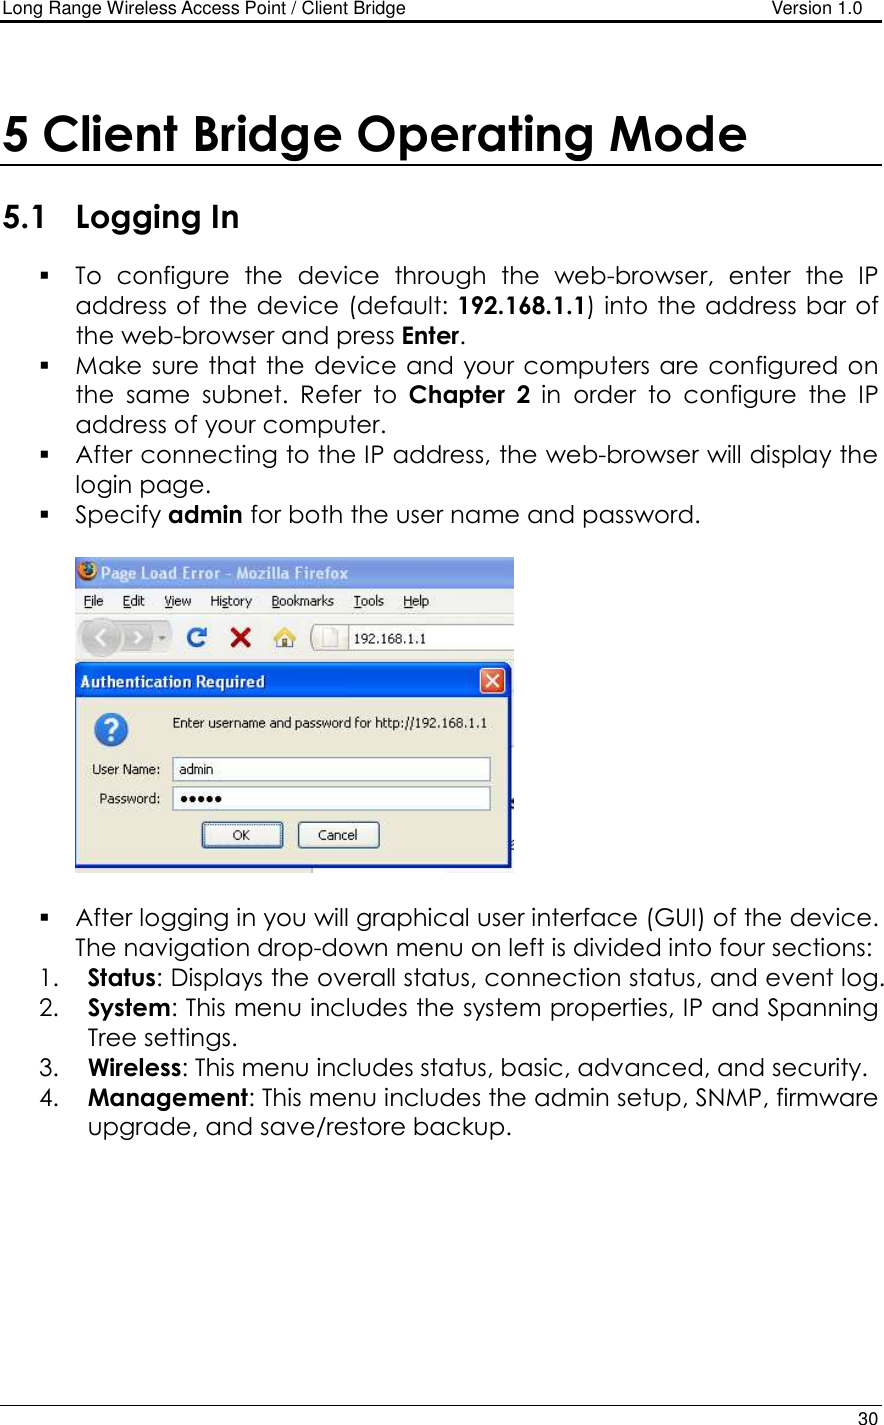 Long Range Wireless Access Point / Client Bridge                                   Version 1.0    30   5 Client Bridge Operating Mode  5.1 Logging In  To  configure  the  device  through  the  web-browser,  enter  the  IP address of the device (default: 192.168.1.1) into the address bar of the web-browser and press Enter.   Make sure that the  device and your computers are configured on the  same  subnet.  Refer  to  Chapter  2  in  order  to  configure  the  IP address of your computer.  After connecting to the IP address, the web-browser will display the login page.  Specify admin for both the user name and password.      After logging in you will graphical user interface (GUI) of the device. The navigation drop-down menu on left is divided into four sections: 1. Status: Displays the overall status, connection status, and event log.  2. System: This menu includes the system properties, IP and Spanning Tree settings.   3. Wireless: This menu includes status, basic, advanced, and security. 4. Management: This menu includes the admin setup, SNMP, firmware upgrade, and save/restore backup.   